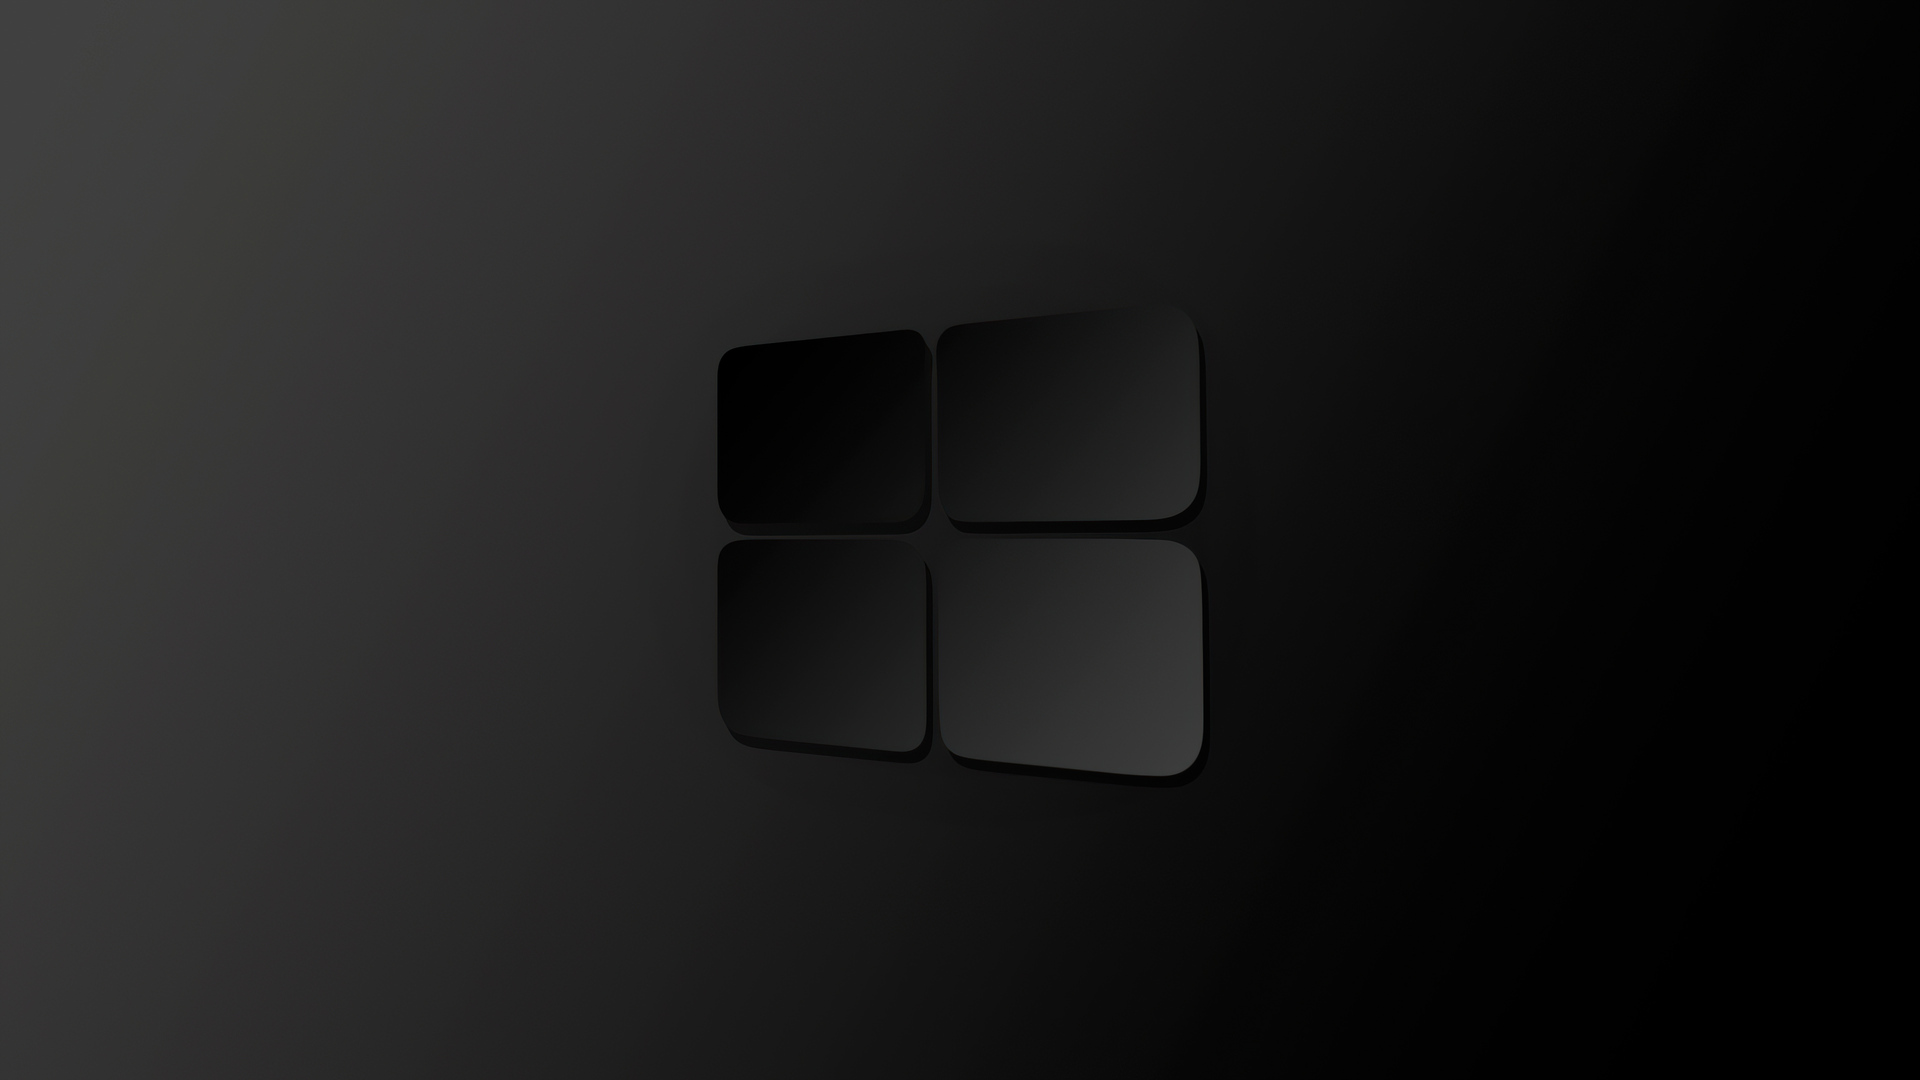 1920x1080 Windows 10 Darkness Logo 4k Laptop Full HD 1080P HD 4k Wallpapers, Images, Backgrounds